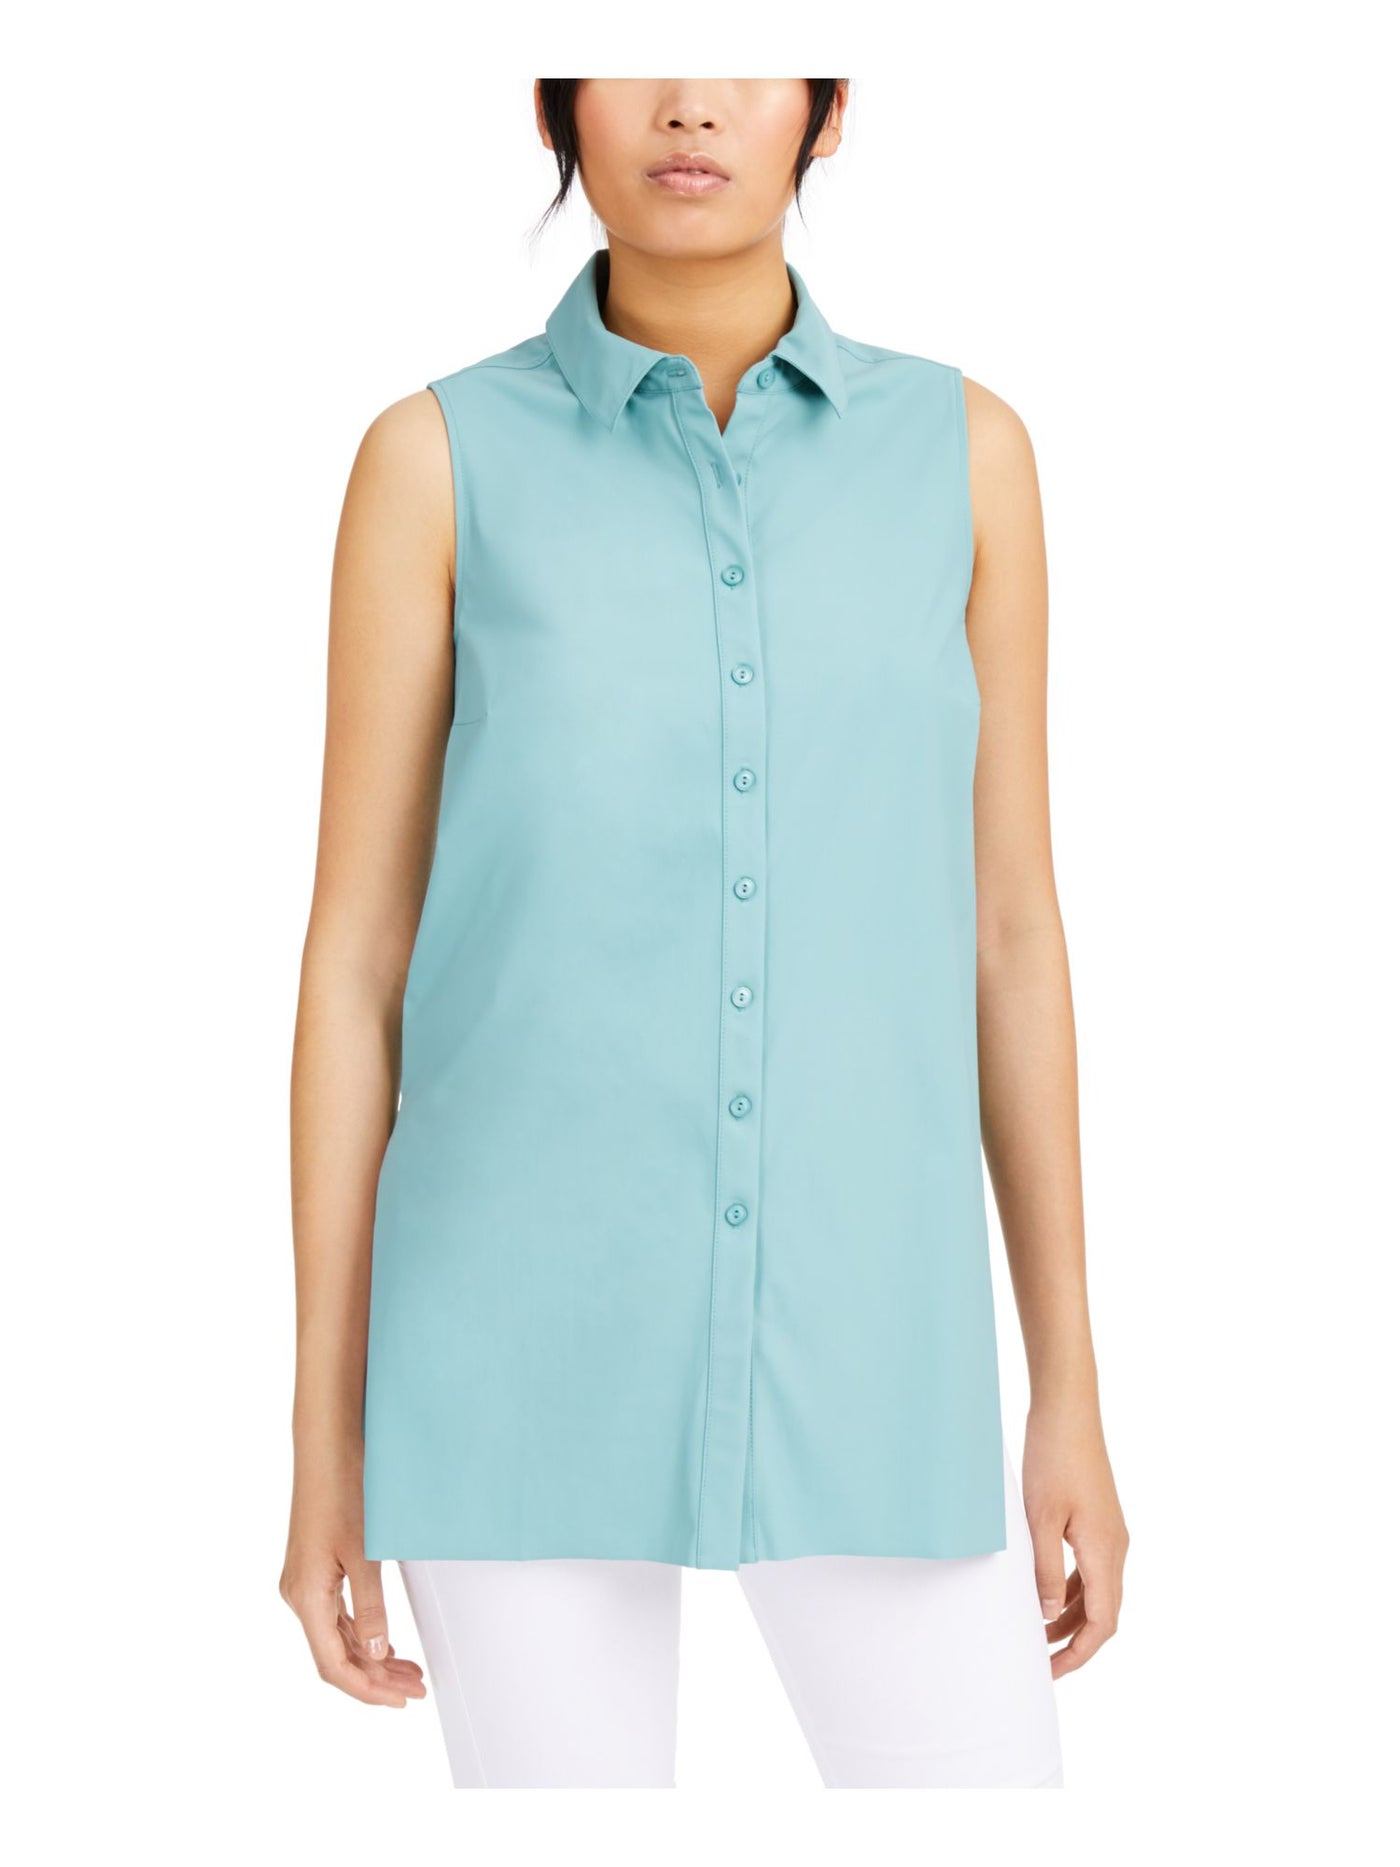 ALFANI Womens Teal Buttons Sleeveless Collared Button Up Top S